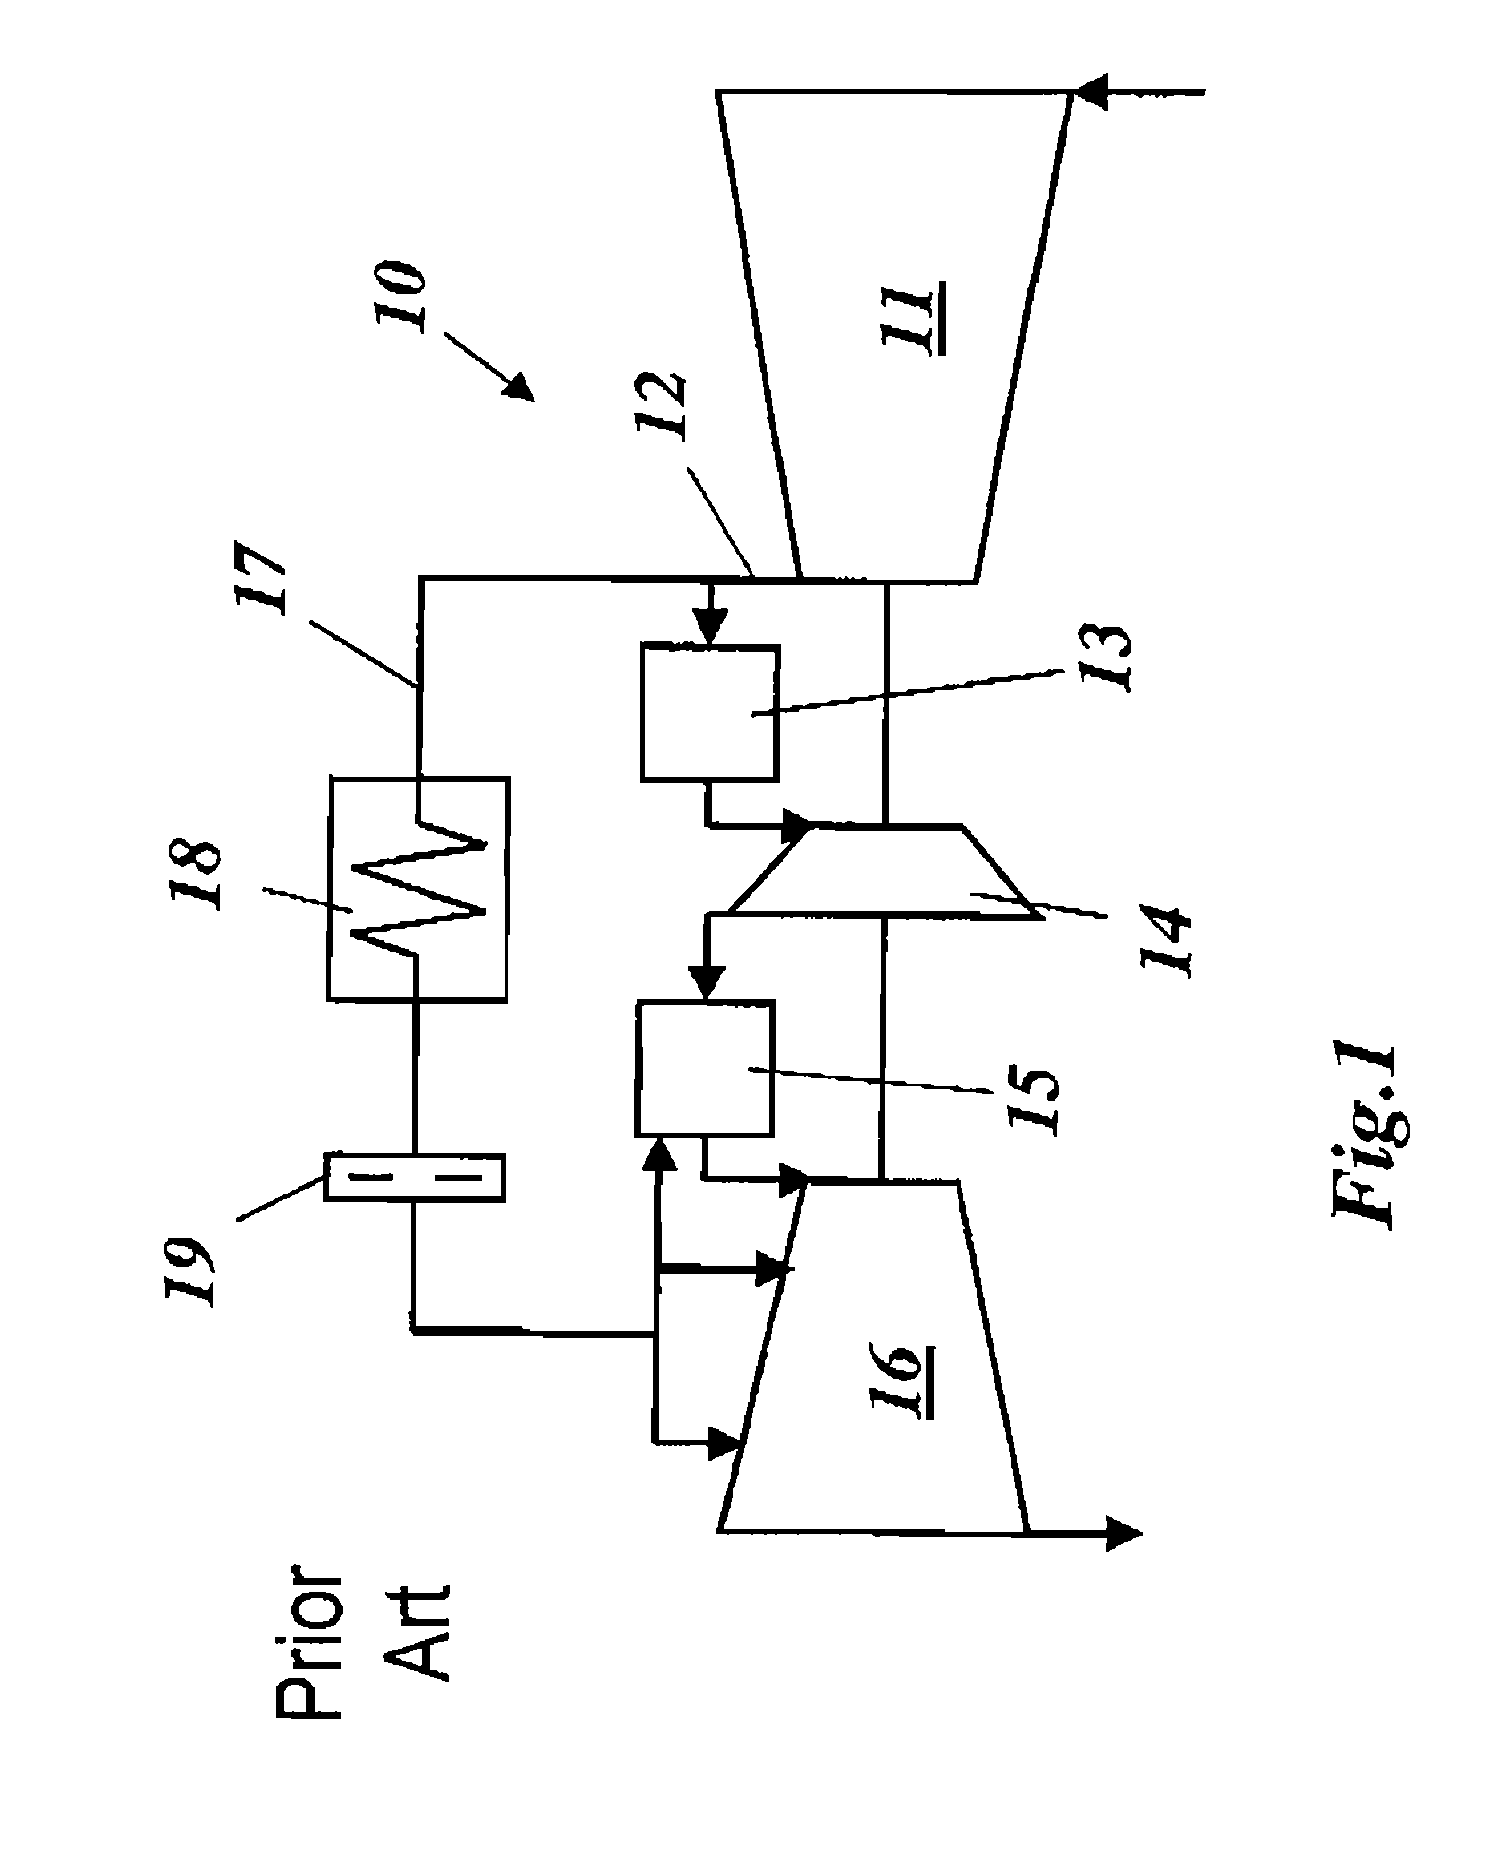 Gas turbine with heat exchanger for cooling compressed air and preheating a fuel